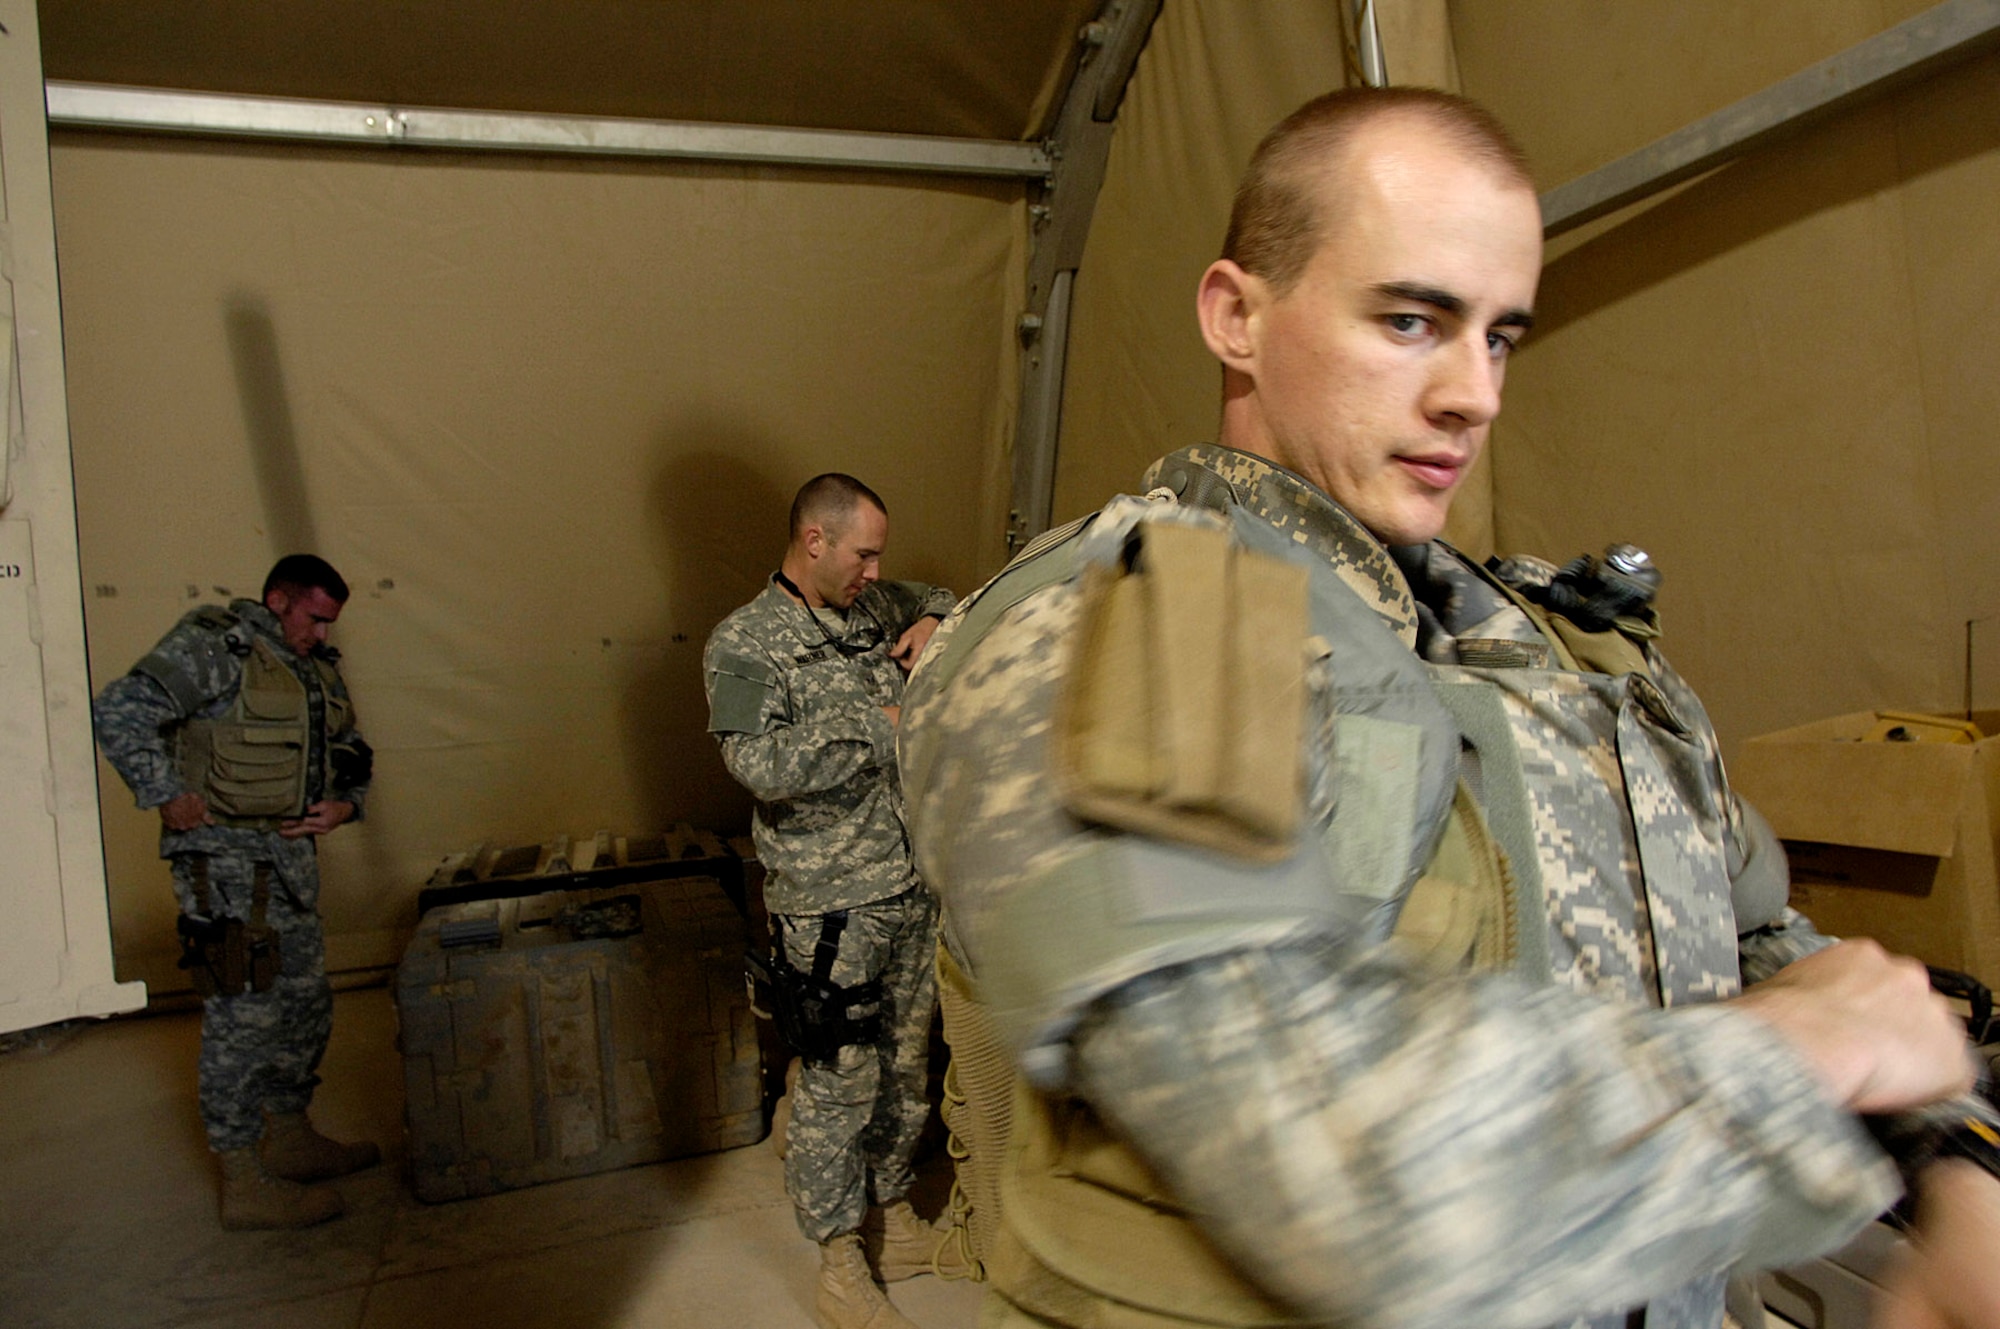 Senior Airman William Newman dons his protective equipment prior to an "outside the wire" mission April 3 at Balad Air Base, Iraq. Airmen Newman is deployed from the Hickam Air Force Base, Hawaii. In background are Staff Sgt. Charles Warner and Staff Sgt. Tom Pilla both deployed from Ramstein Air Base, Germany. The Airmen are assigned to the 332nd Expeditionary Civil Engineer Squadron's Explosive Ordnance Disposal Flight.  (U.S. Air Force photo/Airman 1st Class Nathan Doza)